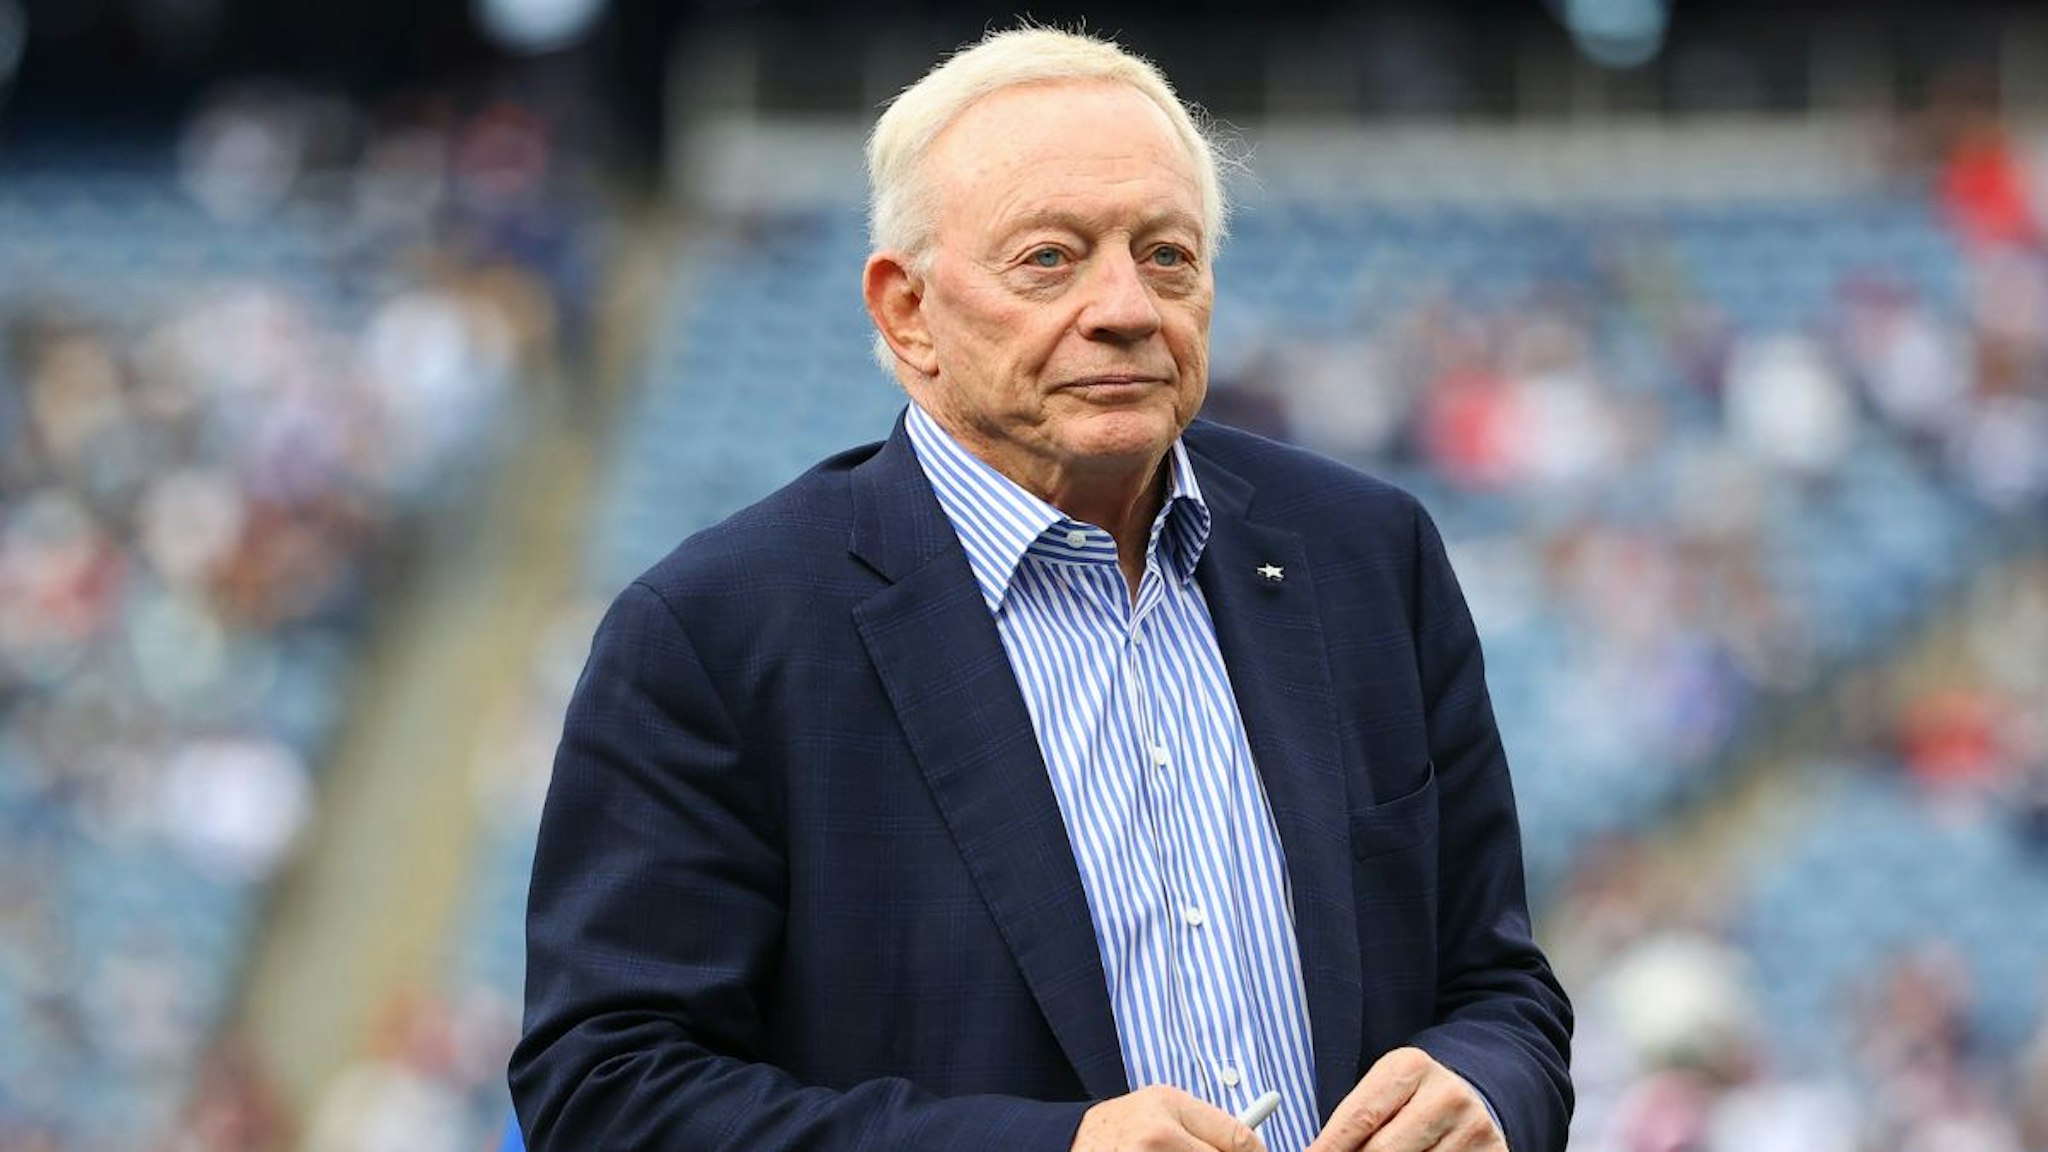 Dallas Cowboys owner Jerry Jones prior to the National Football League game between the New England Patriots and the Dallas Cowboys on October 17, 2021 at Gillette Stadium in Foxborough, MA.